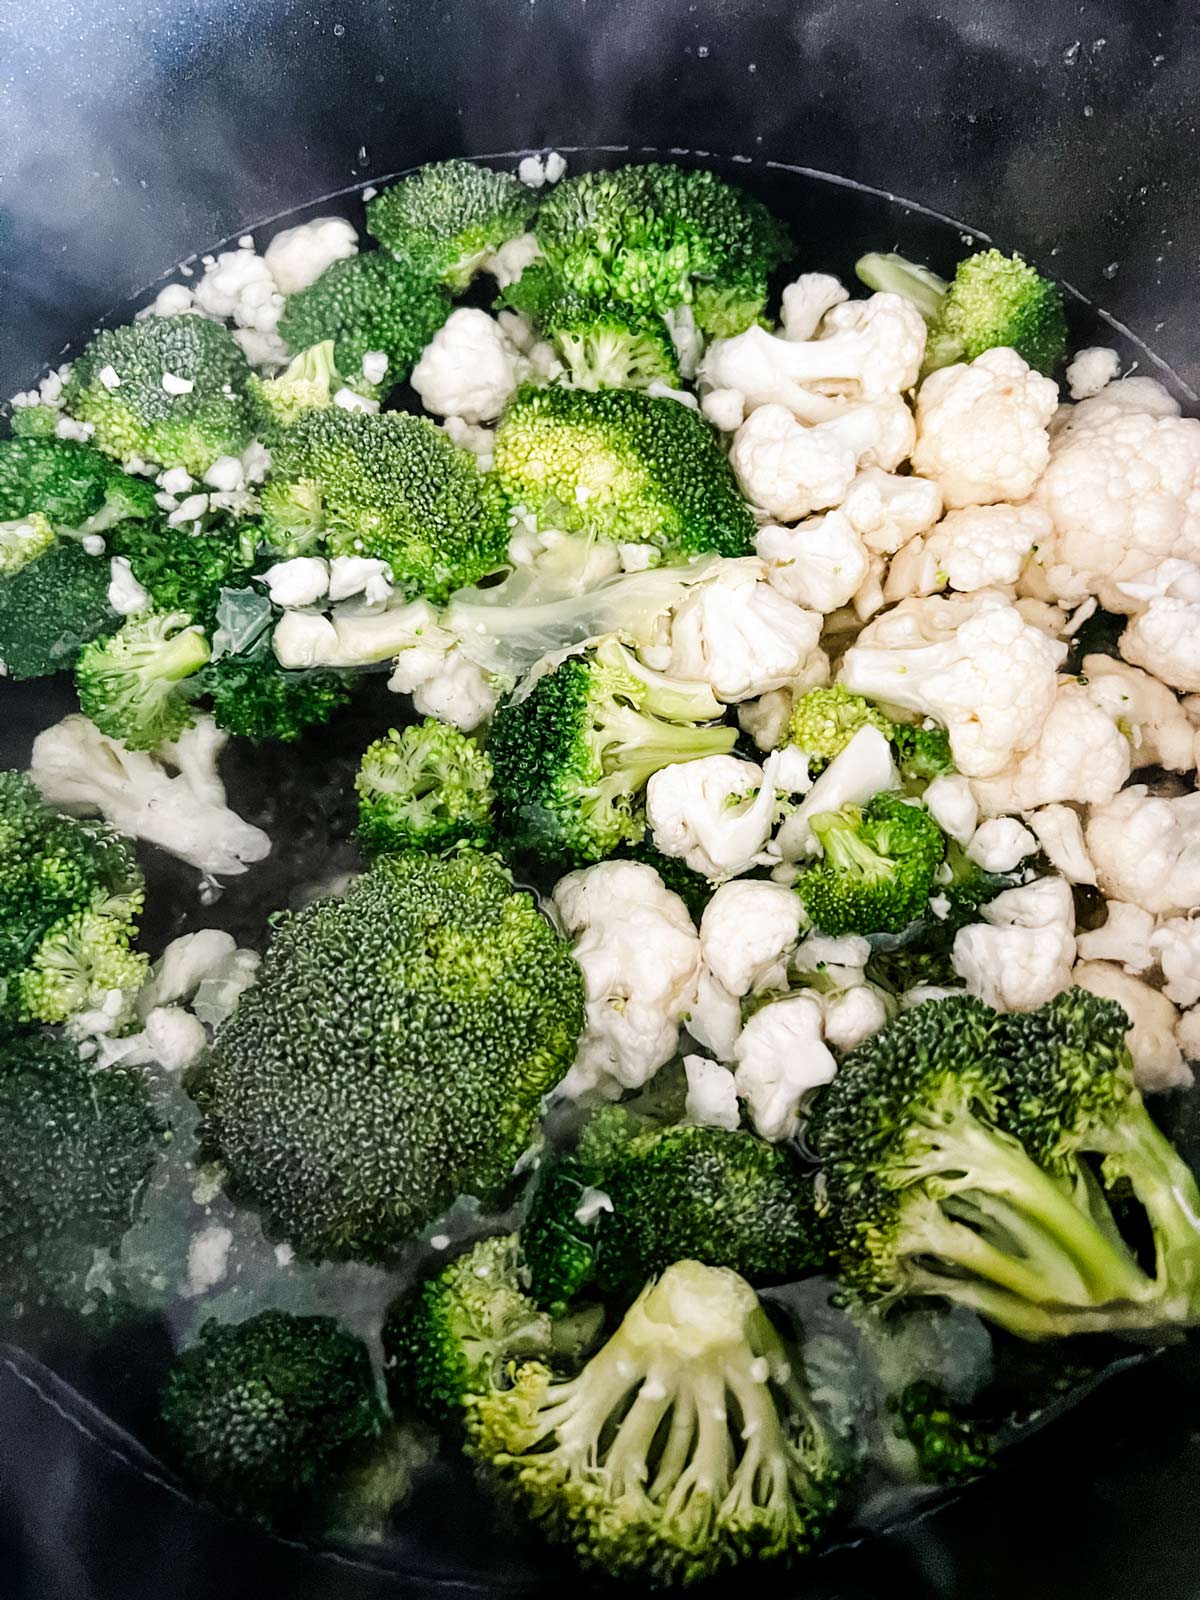 Broccoli and cauliflower in a pot of water blanching.